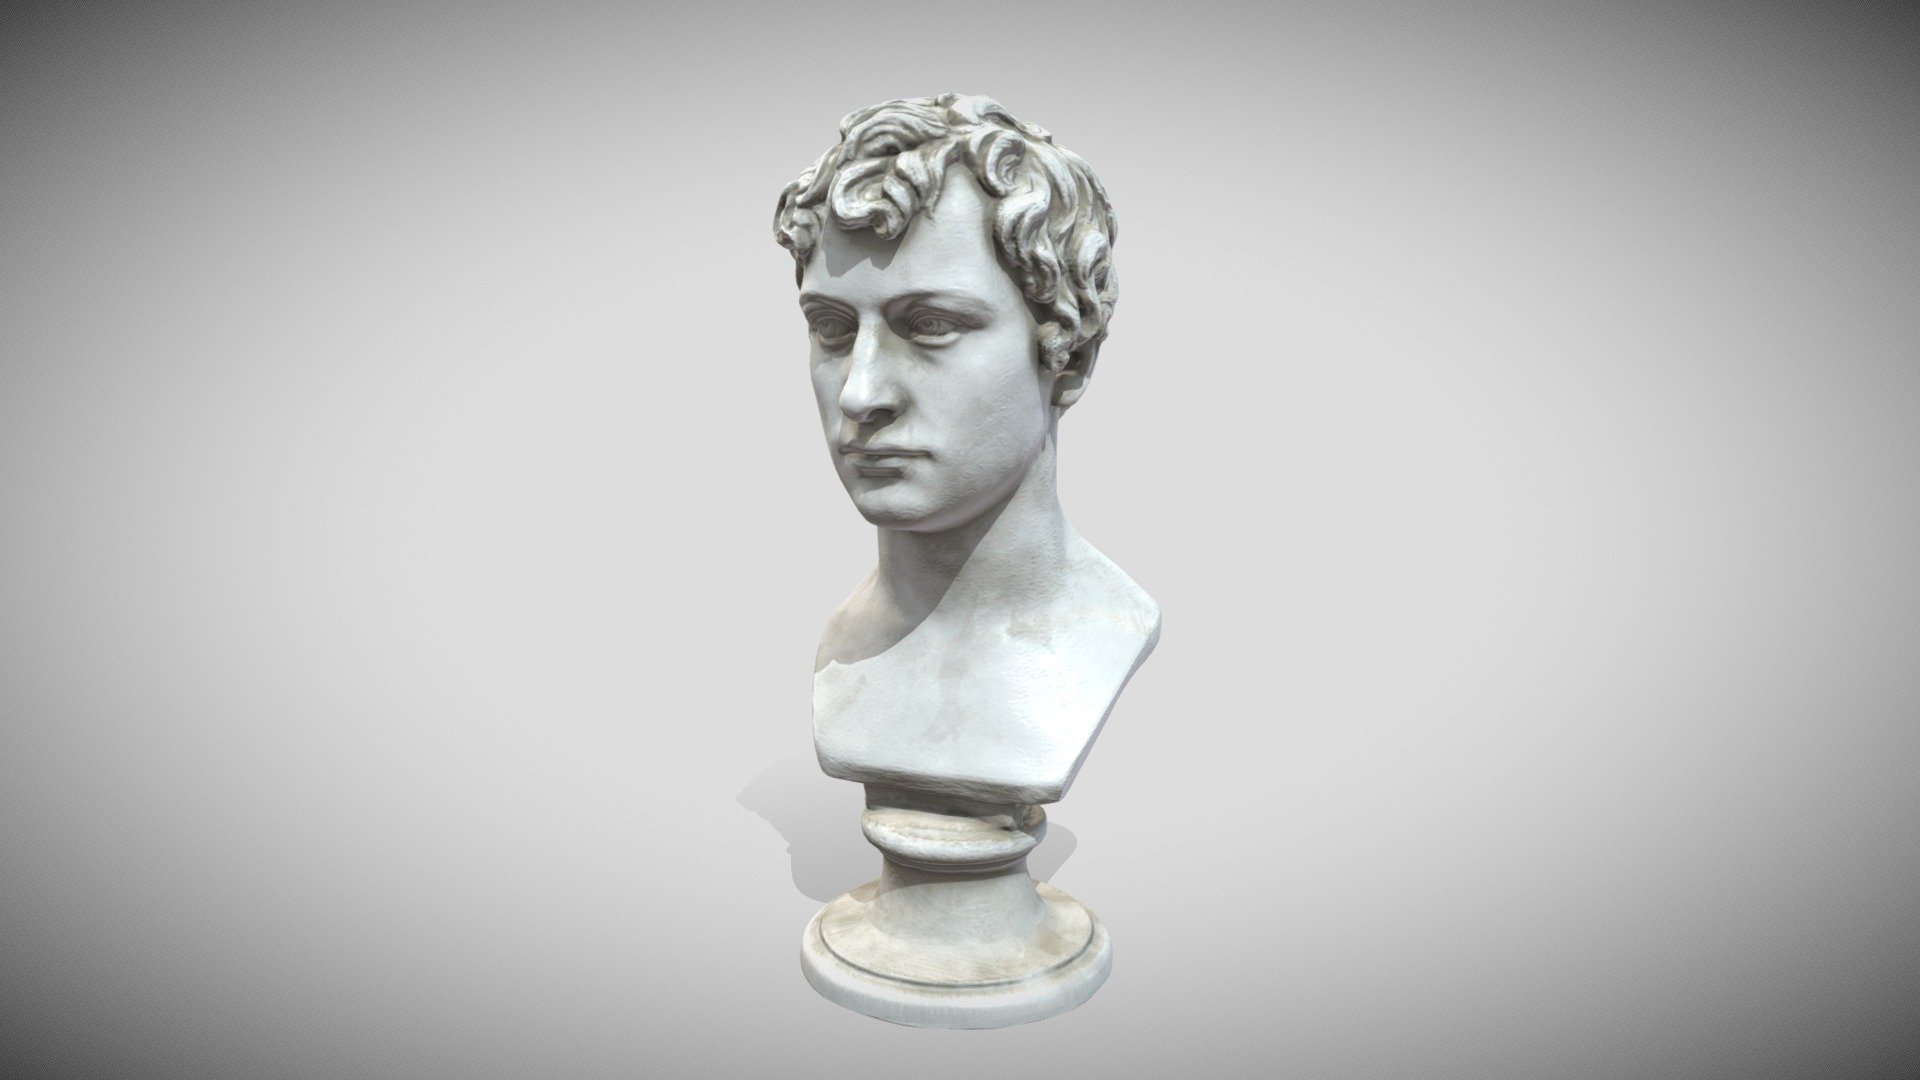 Original very nice 3D Scan from the Thorvaldsens Museum

https://www.myminifactory.com/object/3d-print-henri-francois-brandt-107659

here the Painted Gaming Version LR... 3d model